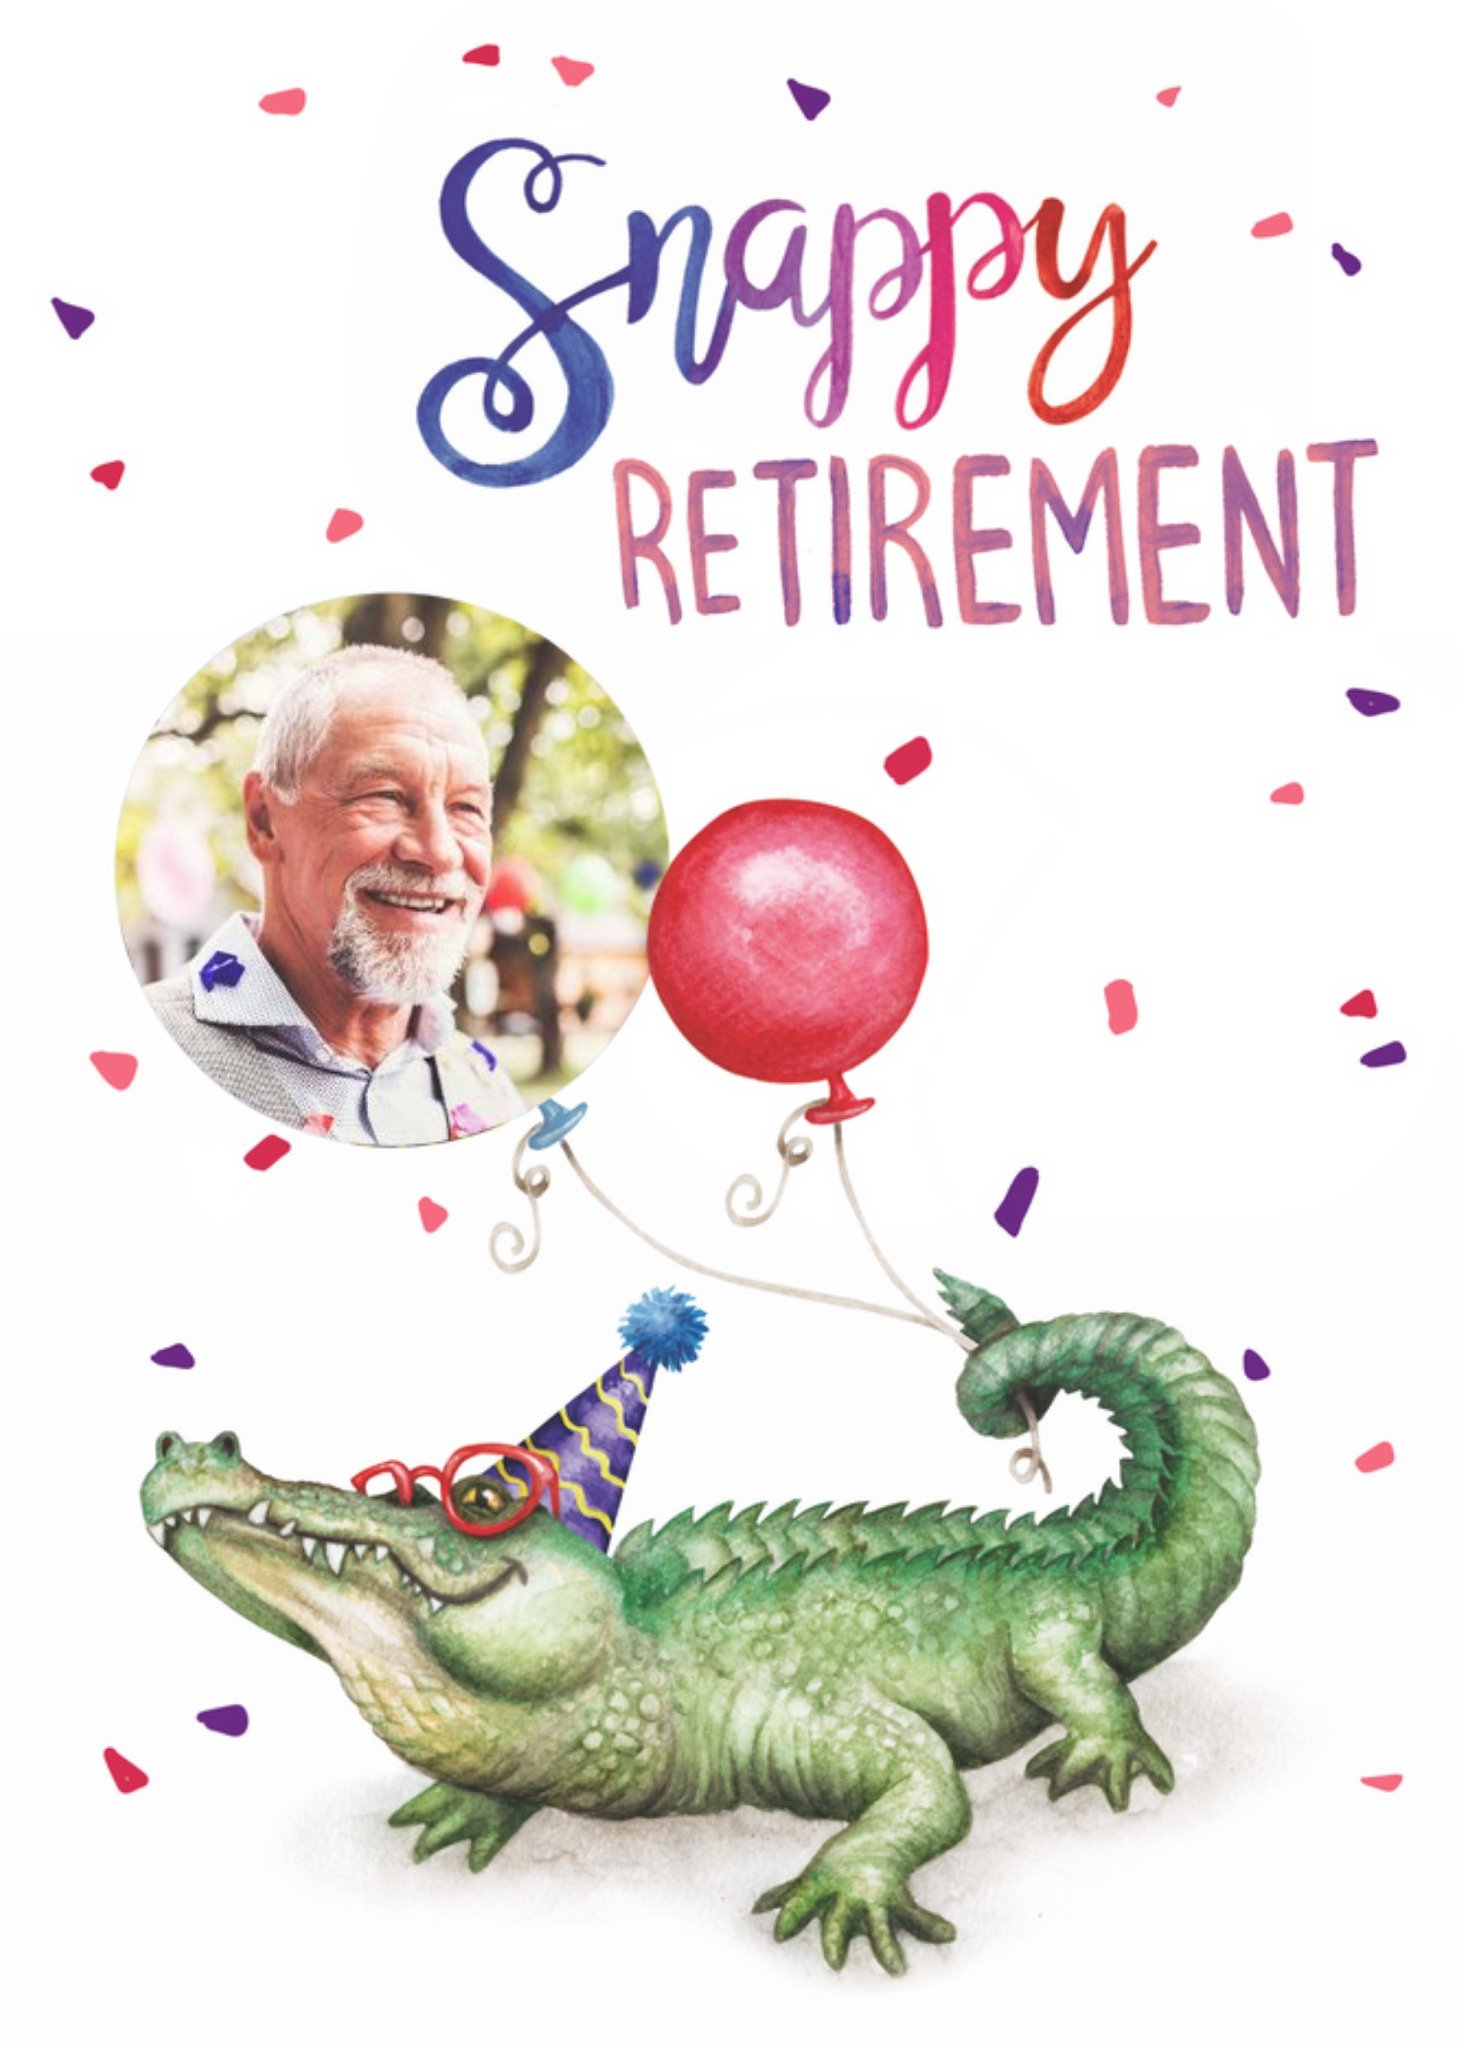 Moonpig Illustration Of A Crocodile With Balloons Funny Pun Photo Upload Retirement Card Ecard